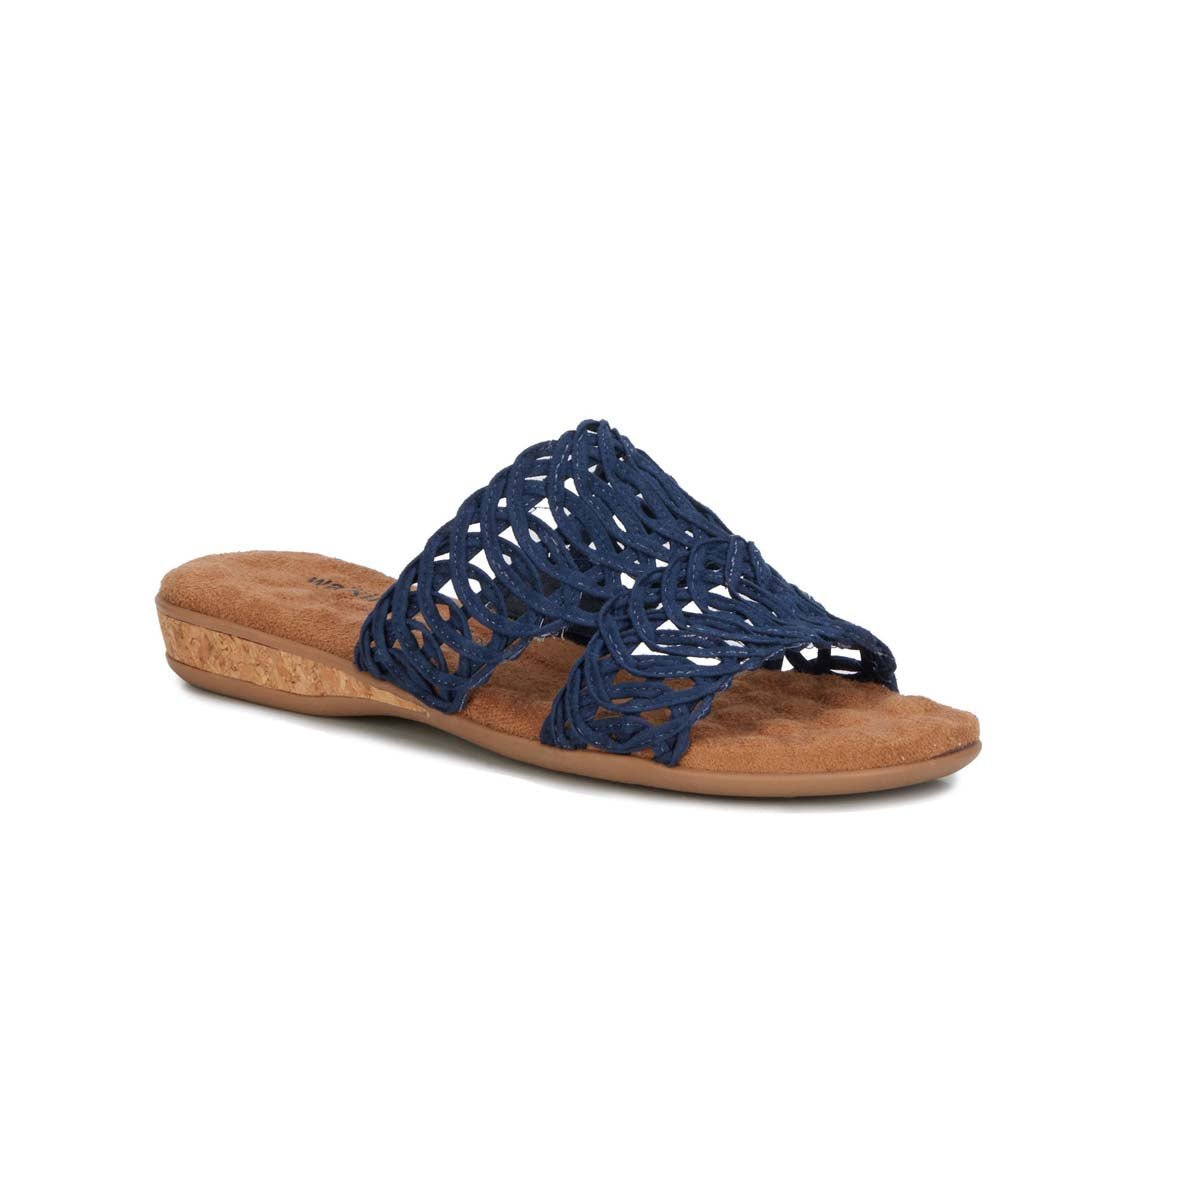 WALKING CRADLES WC CALLA WOMEN SLIP-ON SANDAL IN NAVY SUEDE FABRIC - TLW Shoes